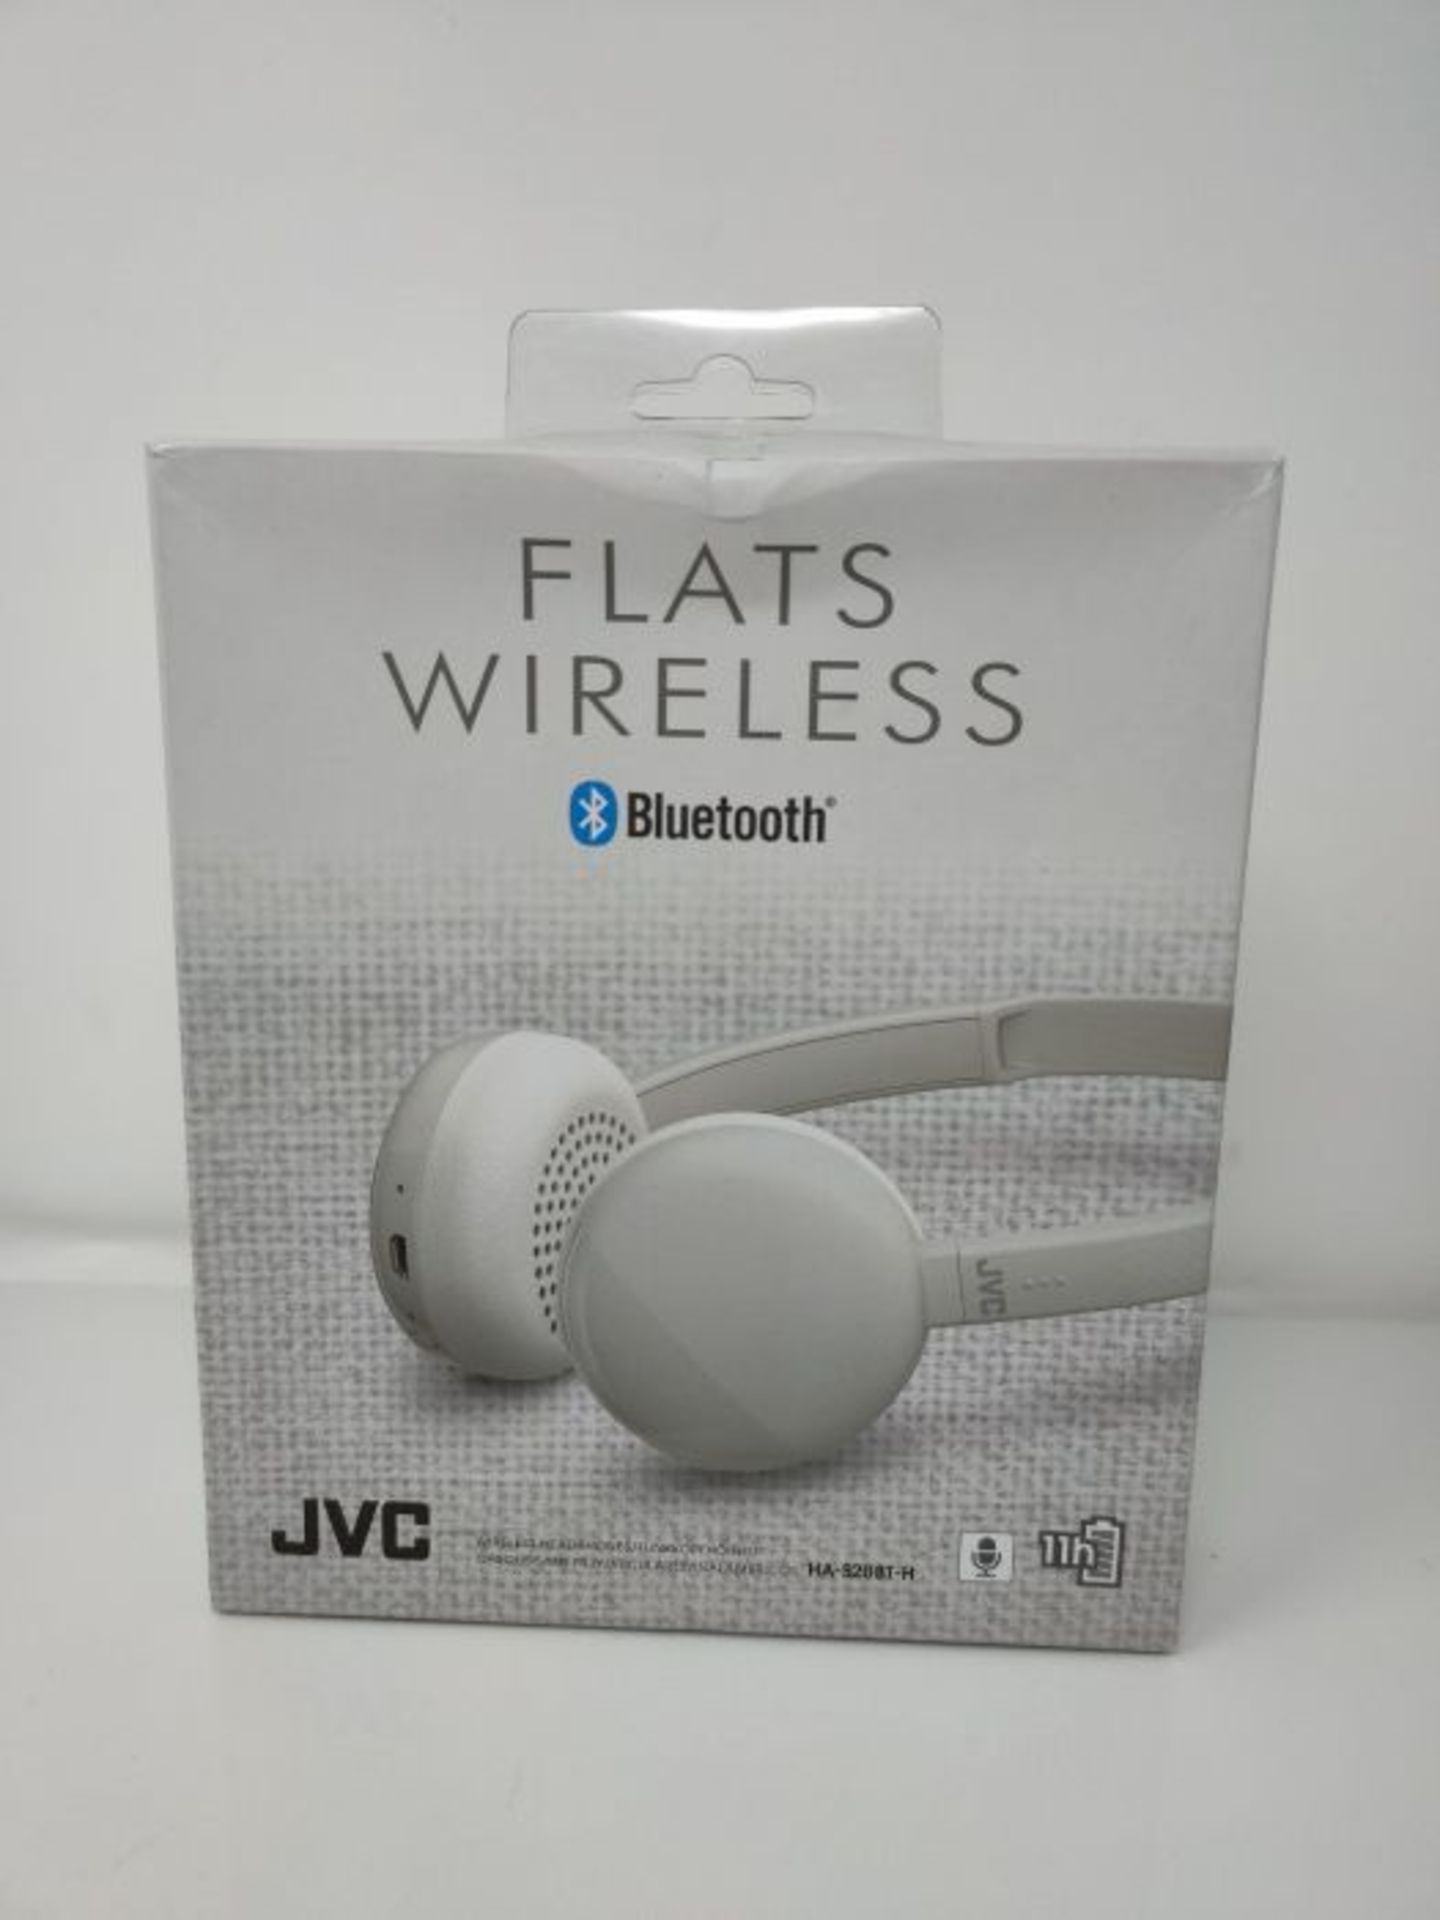 JVC S20BT Wireless Bluetooth On Ear Headphones Foldable with Built-In Remote and Mic f - Image 2 of 3